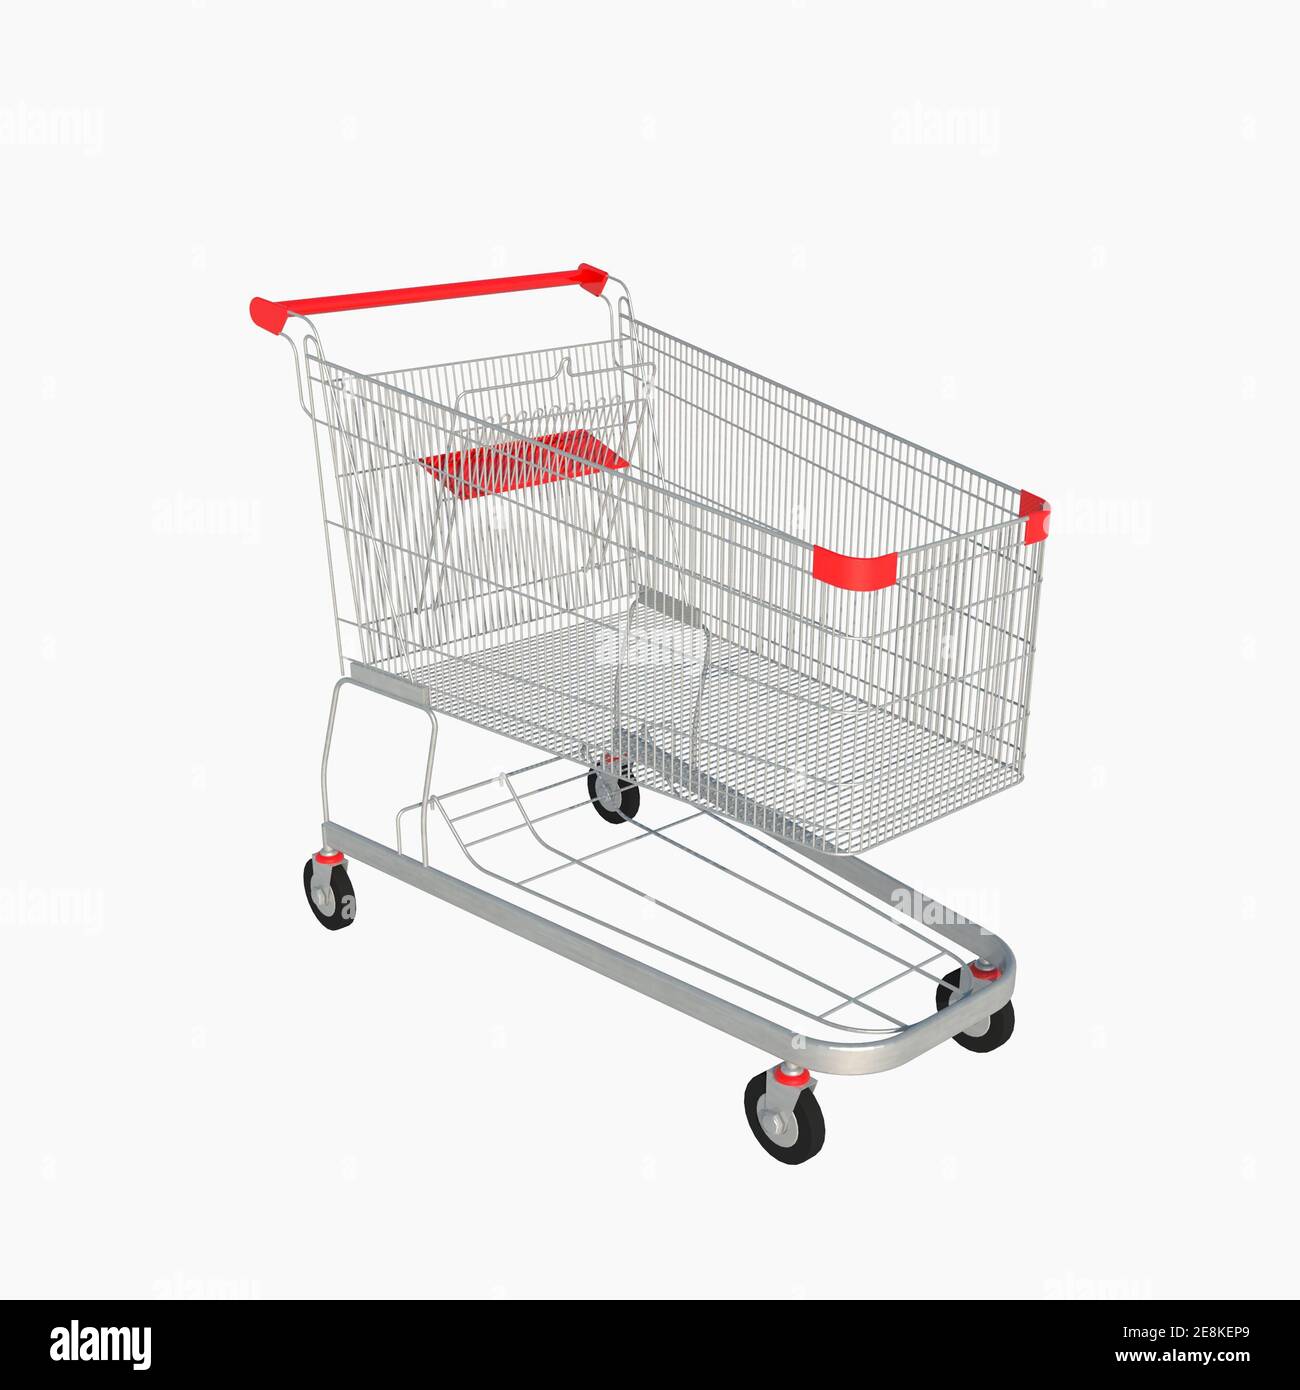 Shopping cart isolated on white background. 3D illustration with clipping path. Stock Photo